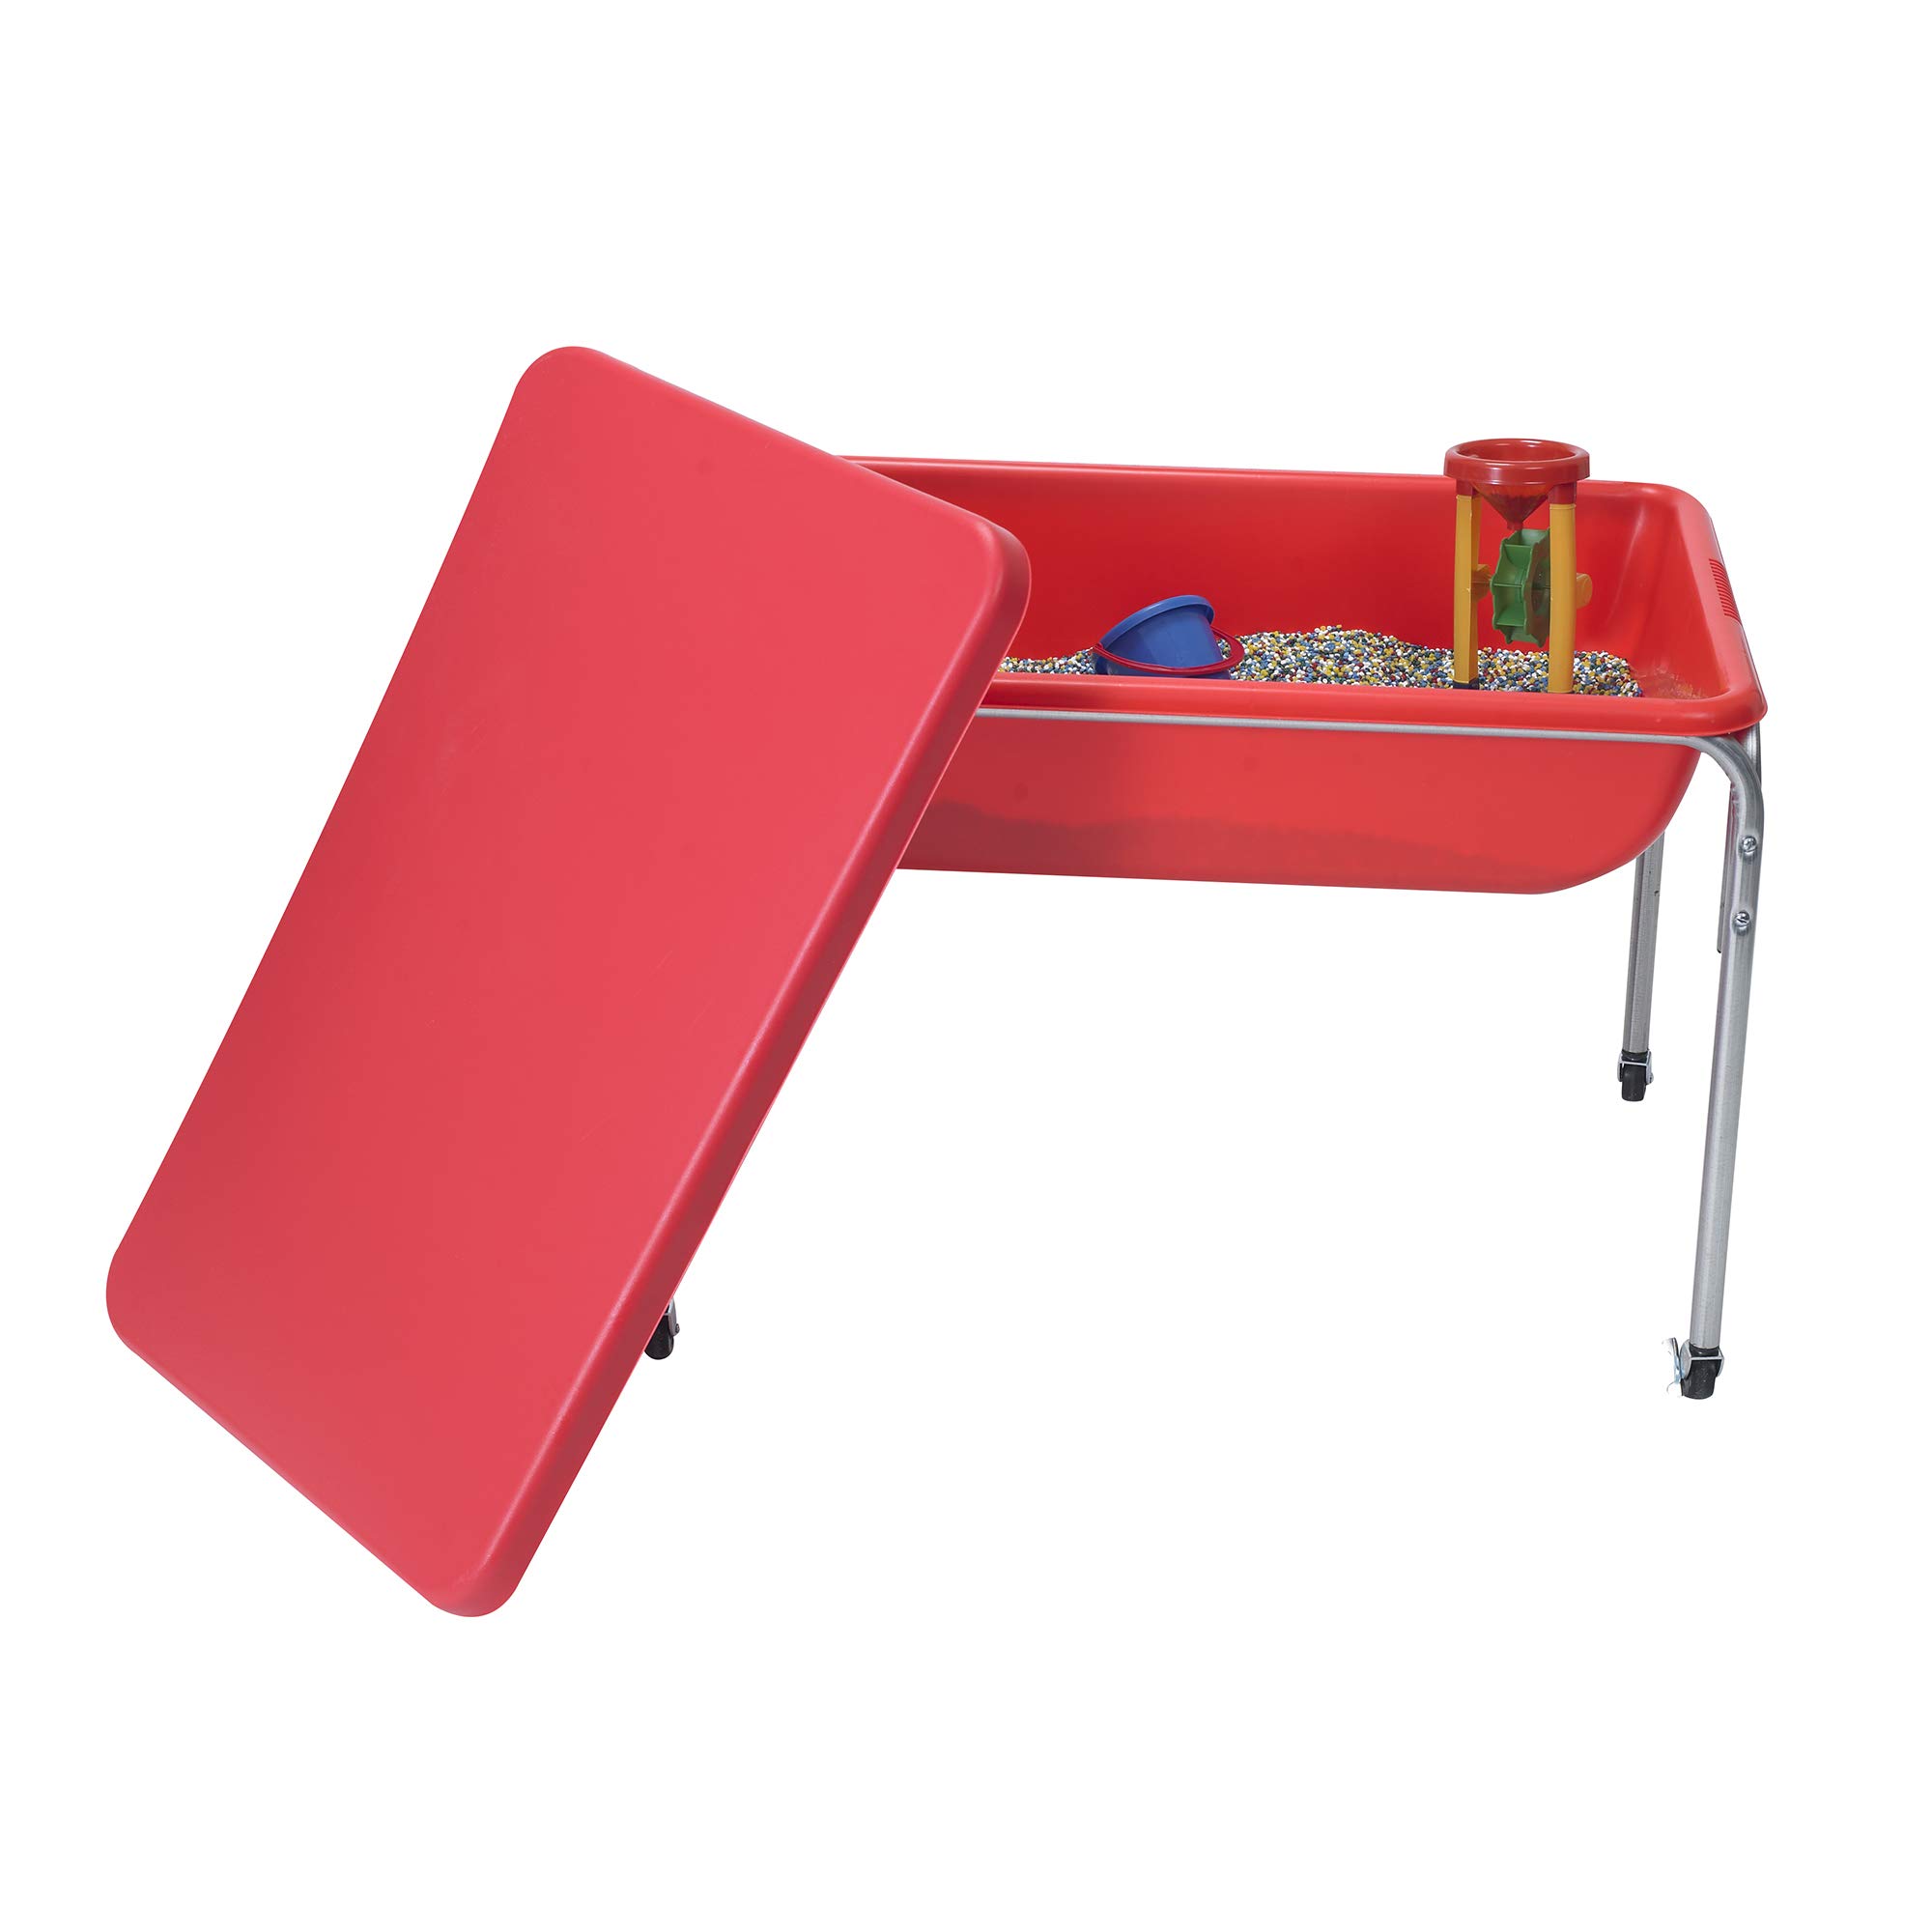 Children's Factory, 1135-24, Large Sensory Table & Lid, Kids Playroom & Classroom Autism Activity, Daycare or Preschool Learning Activities, 24